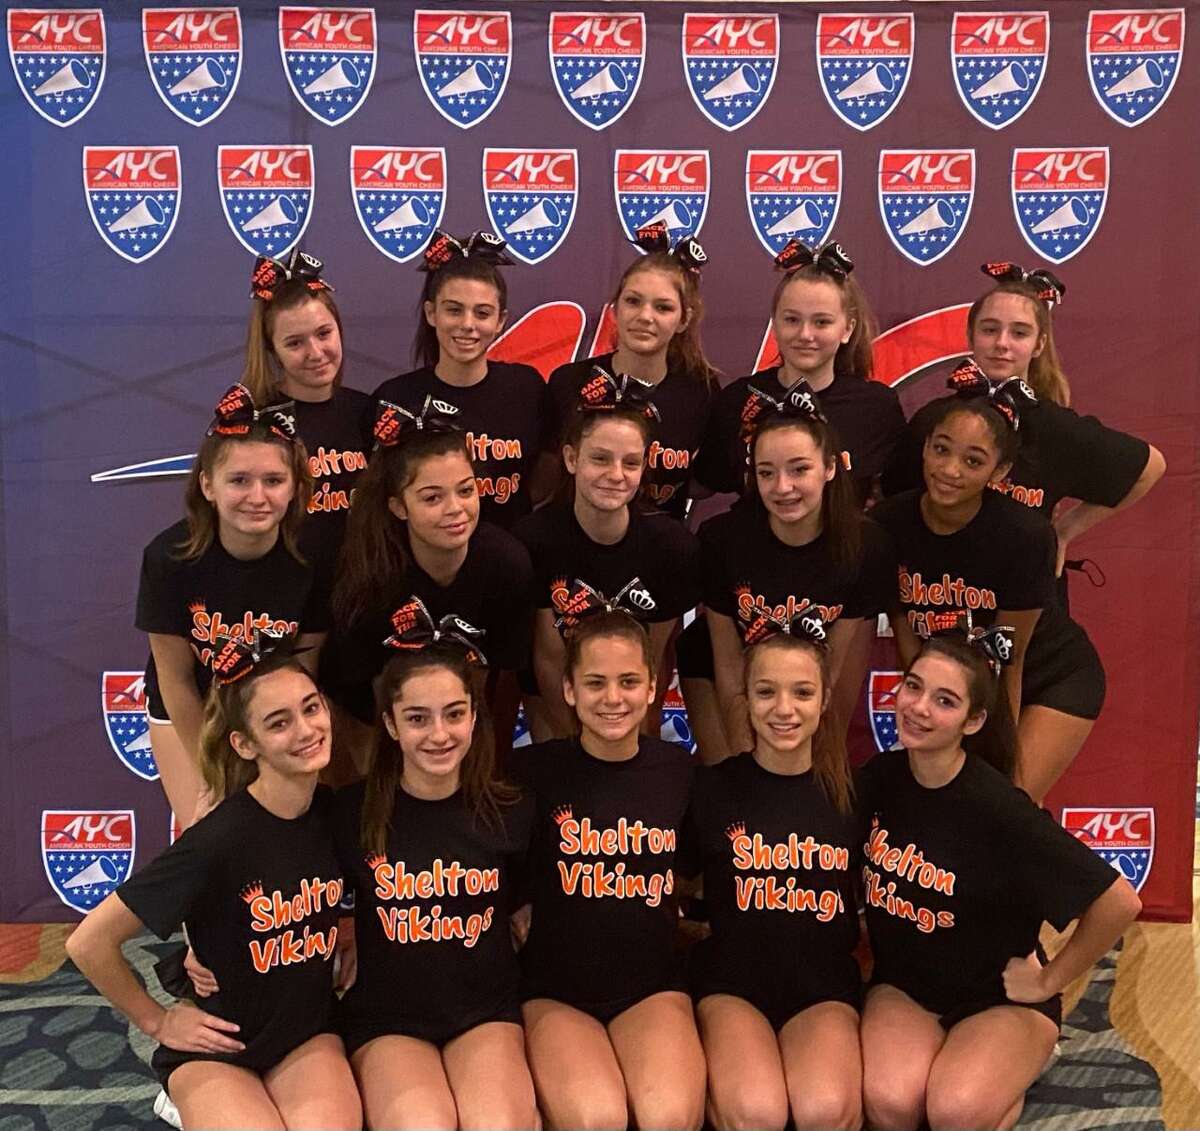 The 2021 Shelton D14 cheer squad completed an undefeated season with a national championship in December.